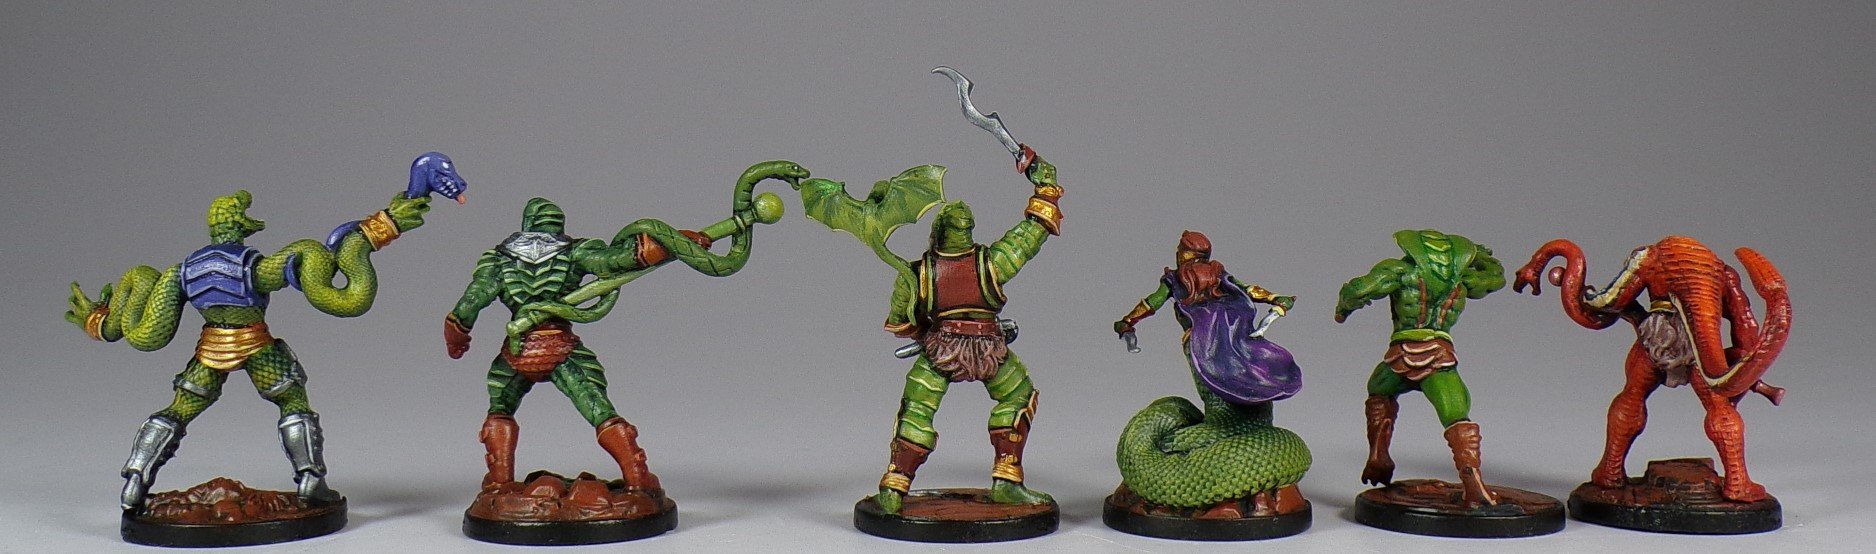 Paintedfigs Masters of the Universe Clash for Eternia miniature painting service (12).jpg